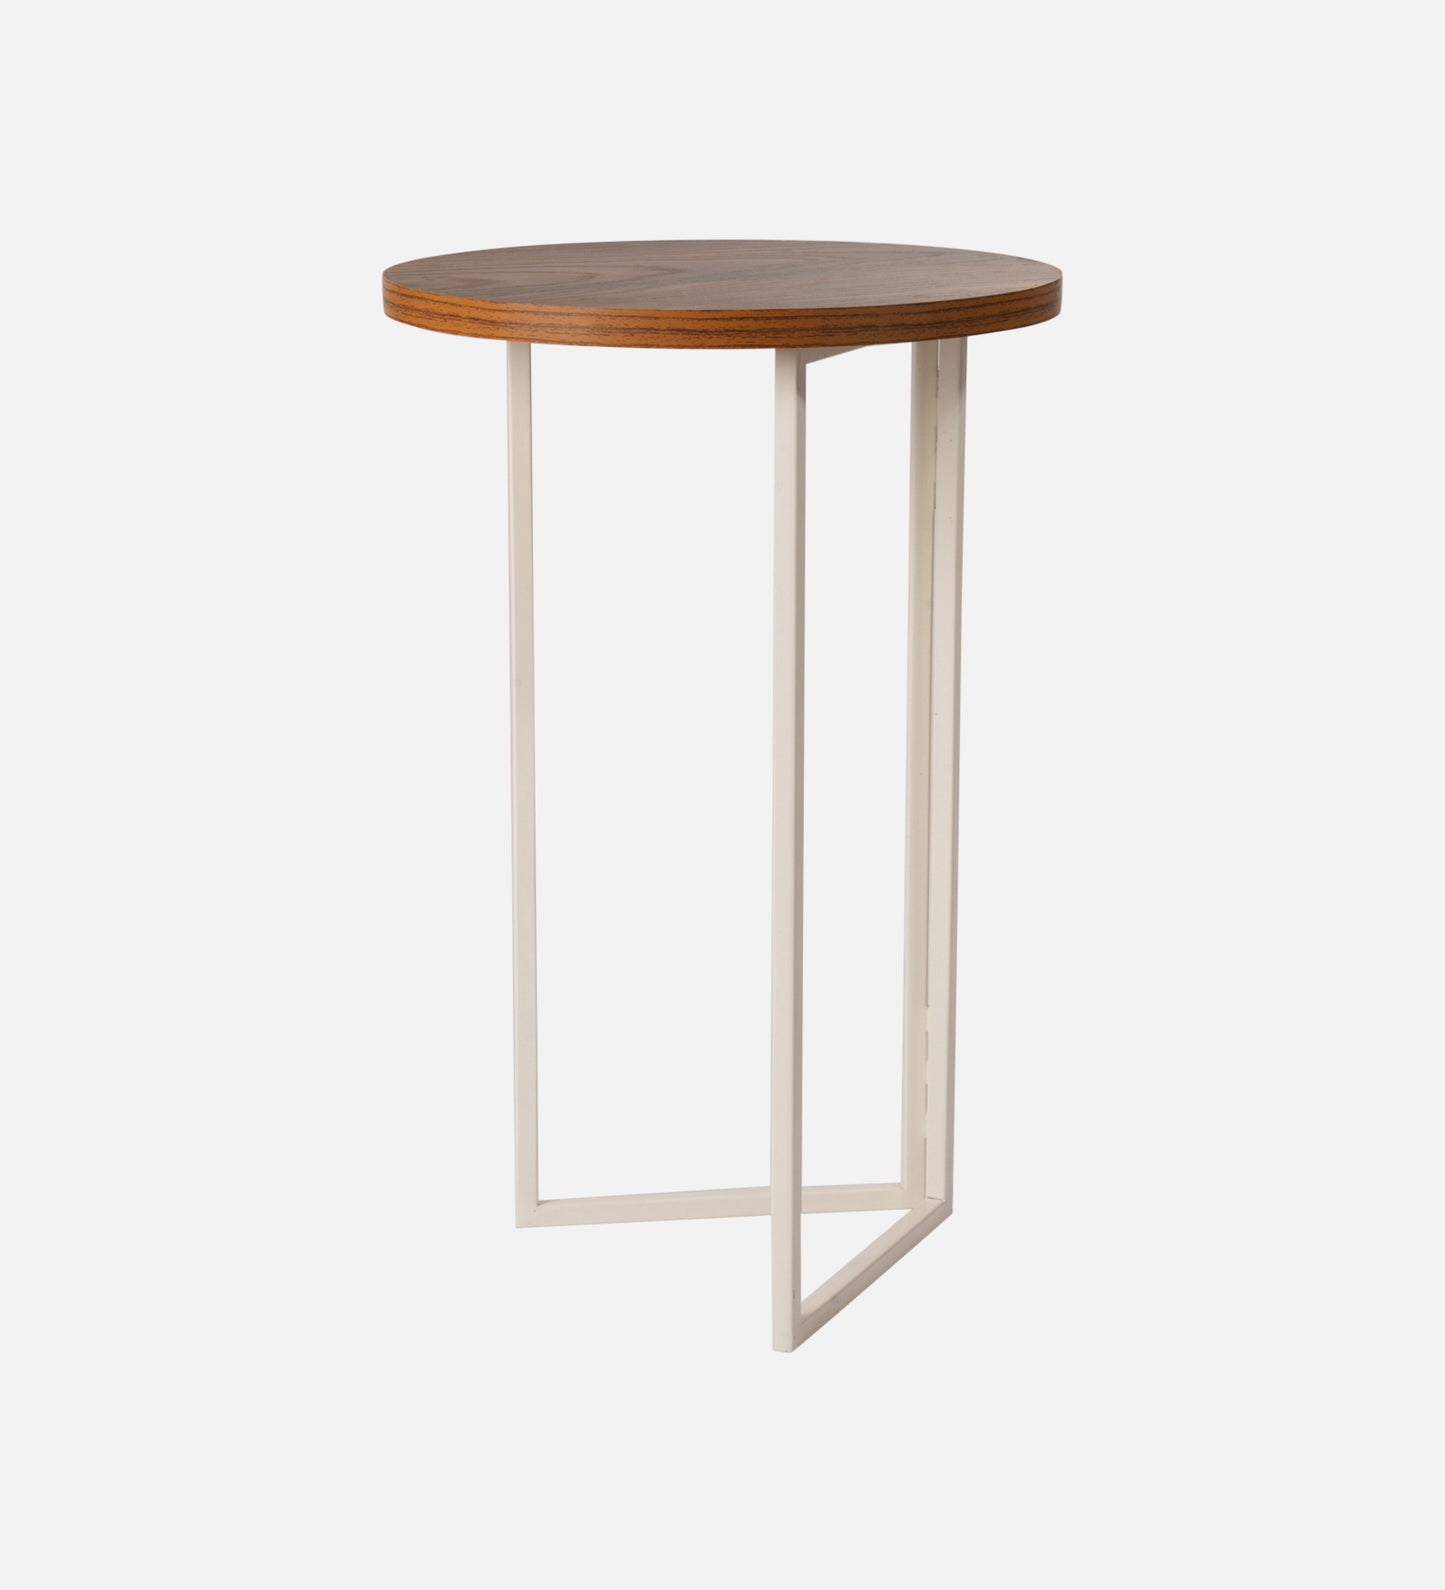 Teak Hues (Ivory Legs) Round Oblique Side Tables, Wooden Tables, Living Room Decor by A Tiny Mistake